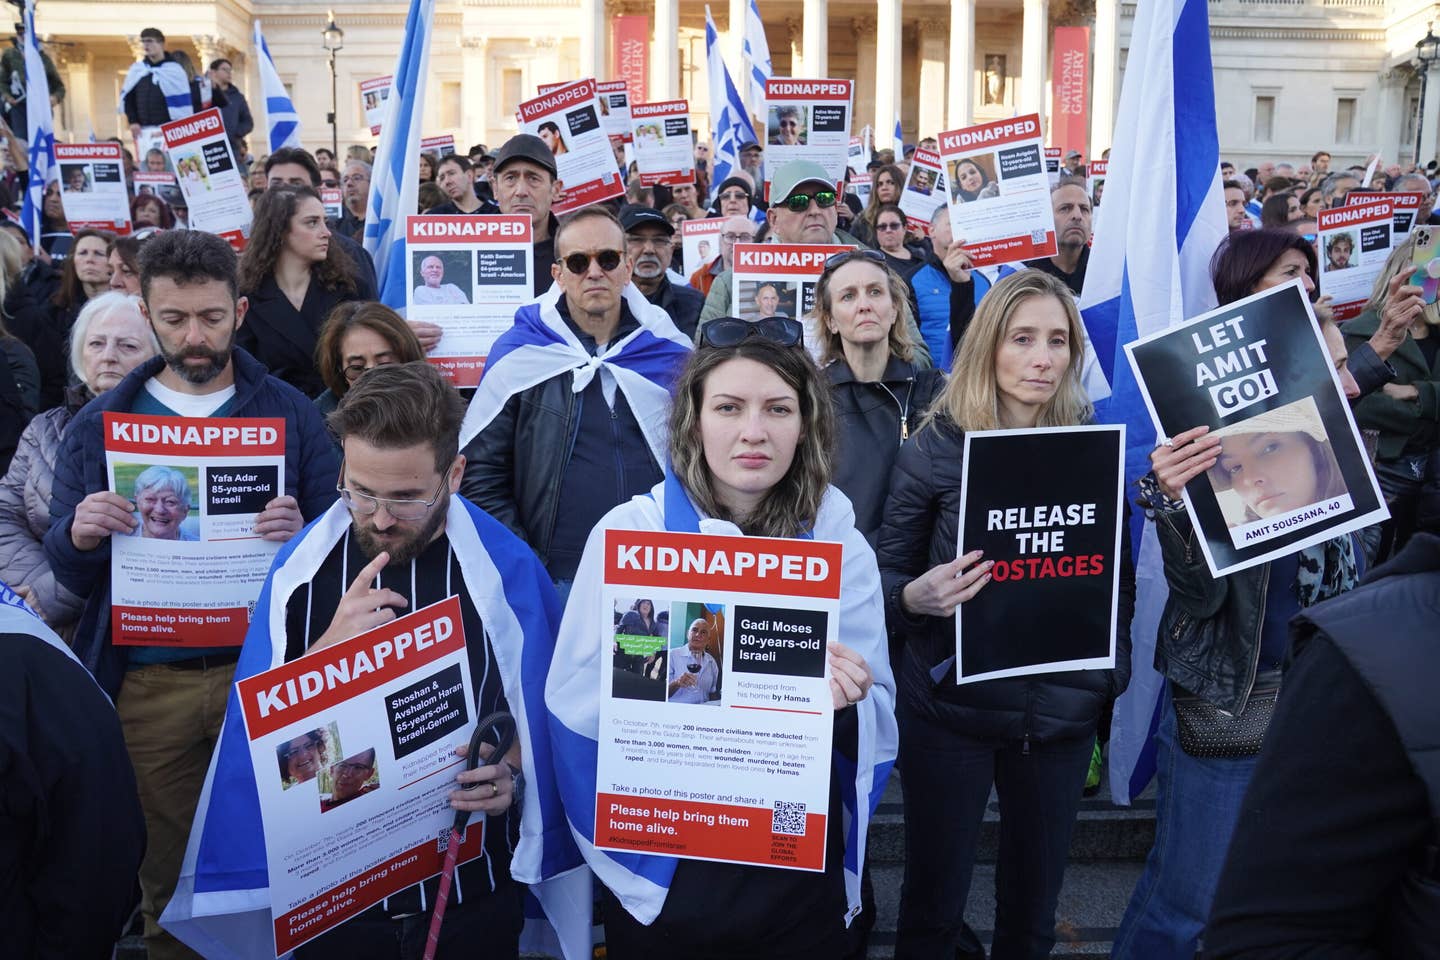 Members of the Jewish community attend a Solidarity Rally in Trafalgar Square, central London, calling for the safe return of hostages and to highlight the effect of the Hamas attacks on Israel. (Photo by Lucy North/PA Images via Getty Images)